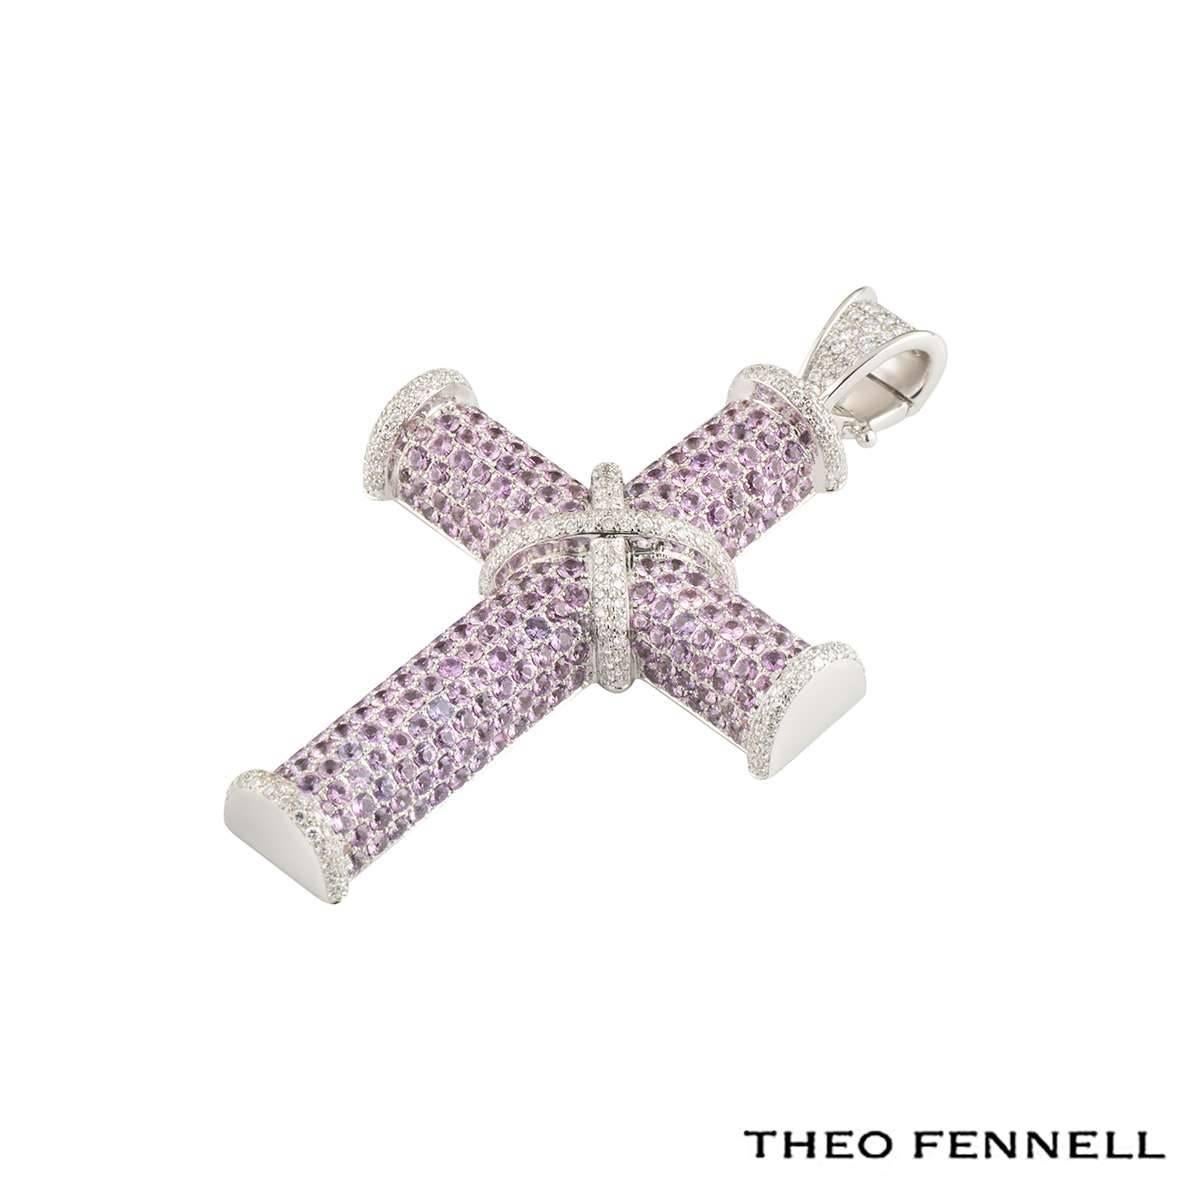 A stunning 18k white gold Theo Fennell pink sapphire and diamond cross pendant. The pendant comprises of a cross motif, fully pave set with round brilliant cut diamonds on the 4 edges and is accentuated by a diamond set 'X' design set to the centre